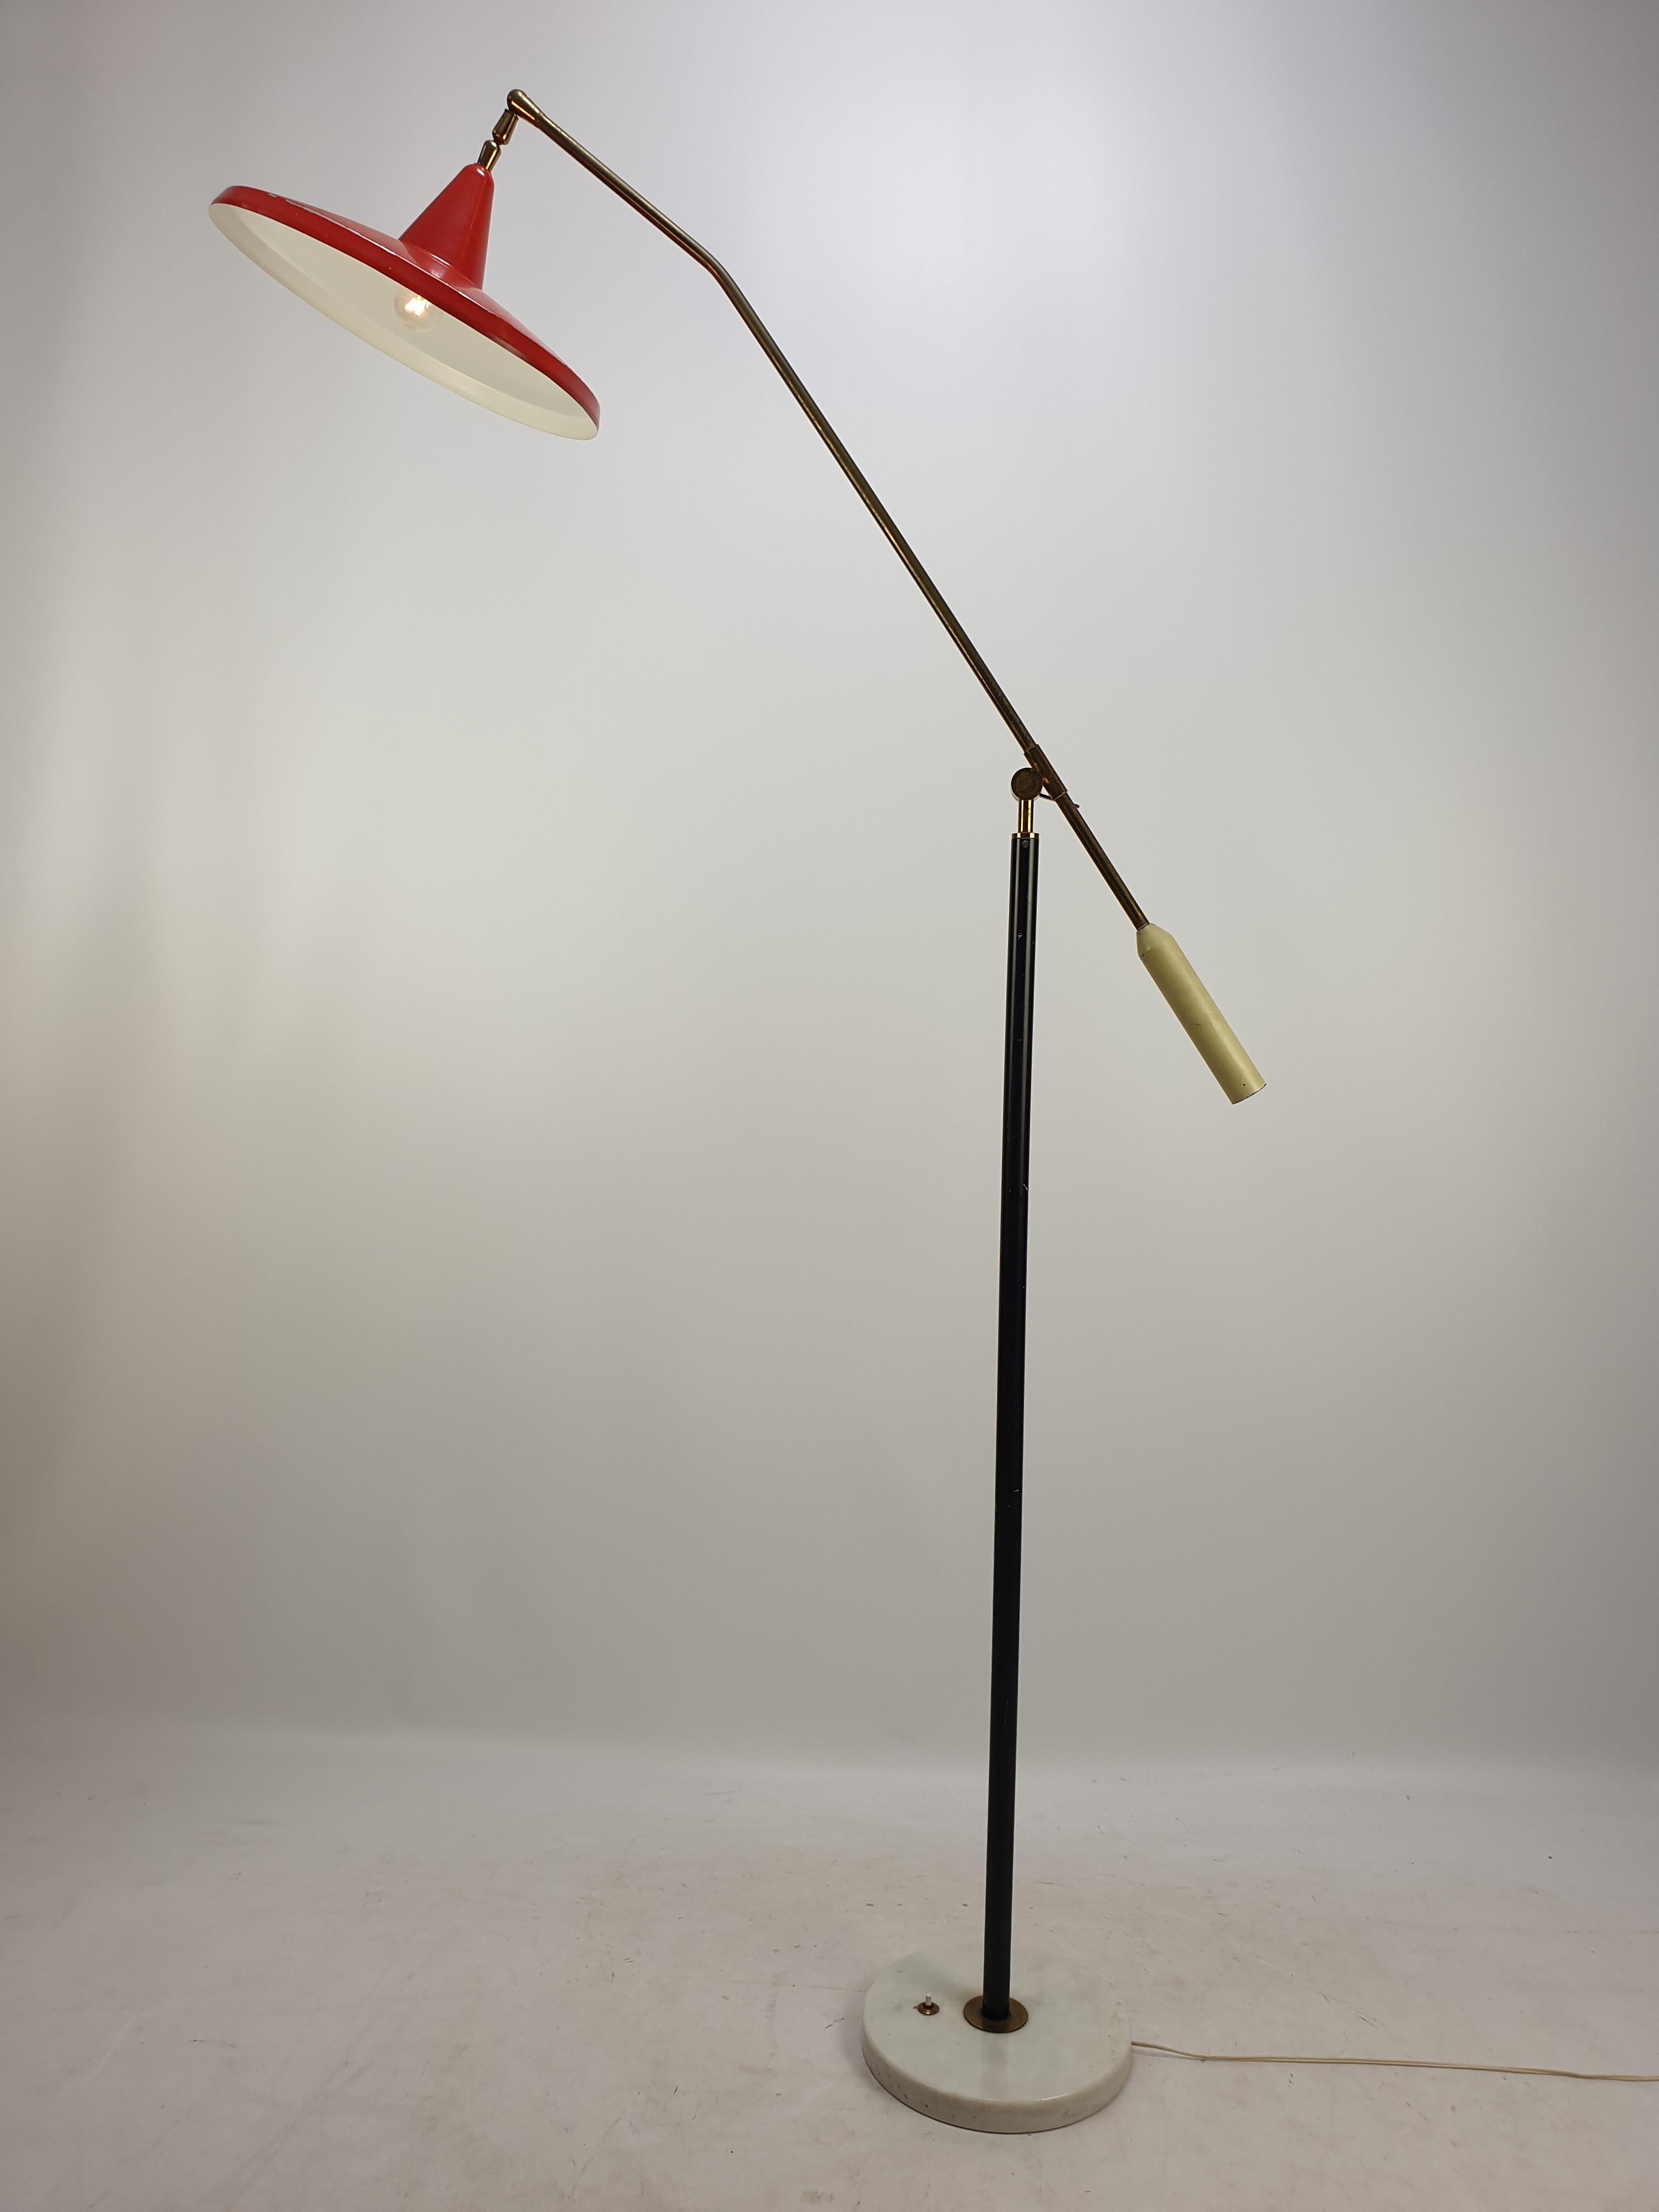 Very nice floor lamp manufactured by Stilnovo in Italy, 1950.

It has a round marble base and a black stem that is extendable in height.
The lamp has solid adjustable brass arm and red lacquered aluminum lampshade.
Original vintage